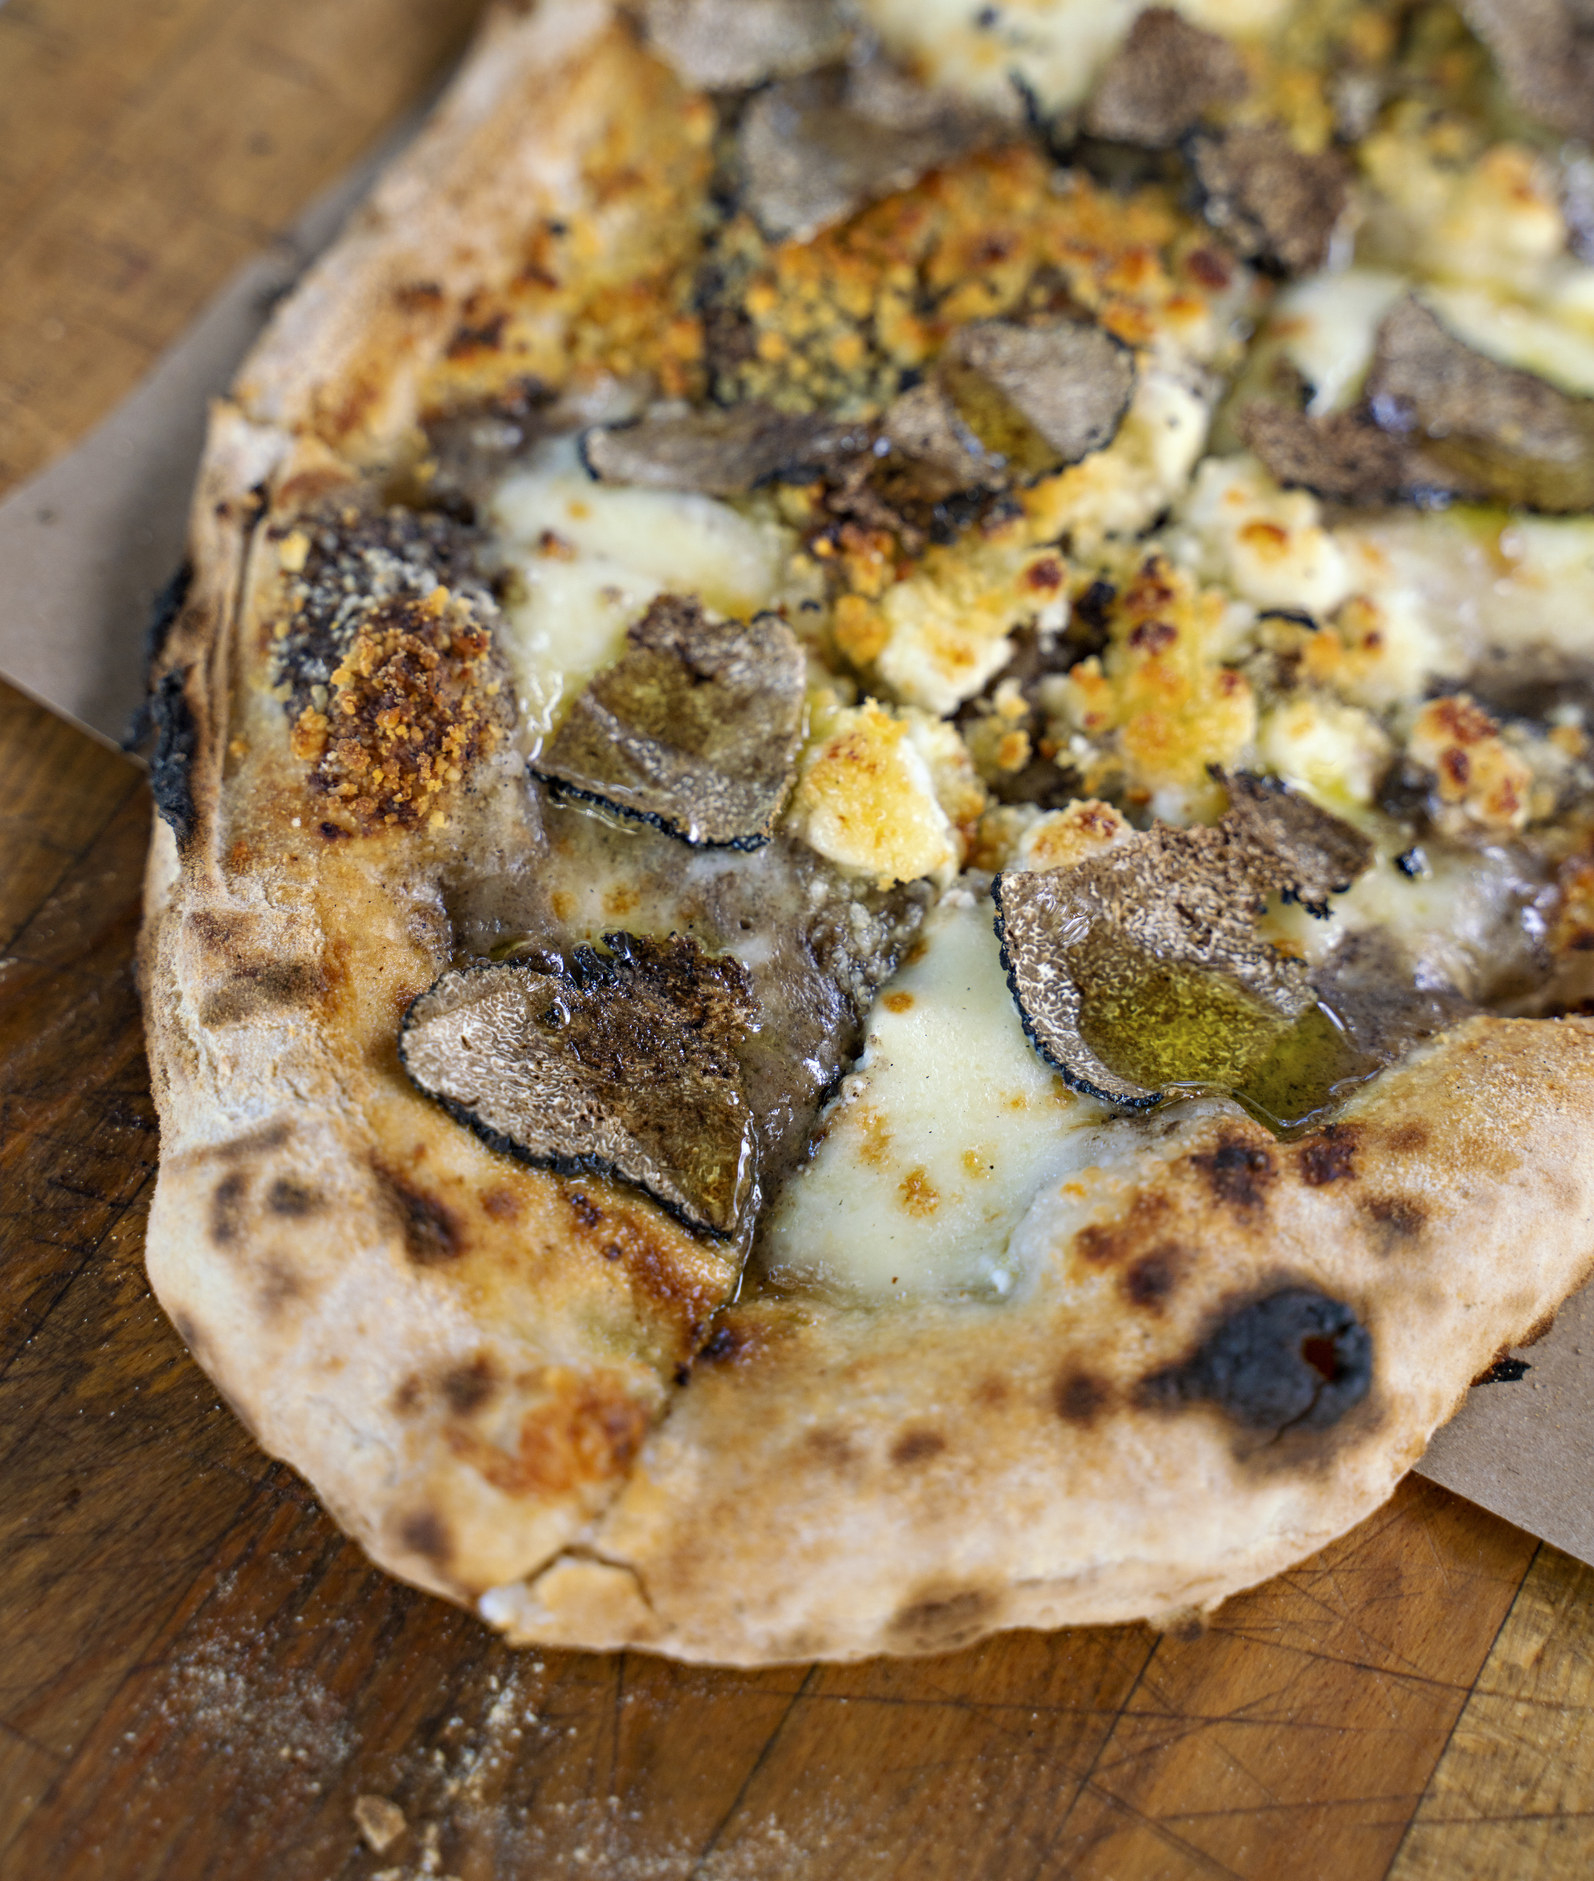 Pizza with cheese and truffles.